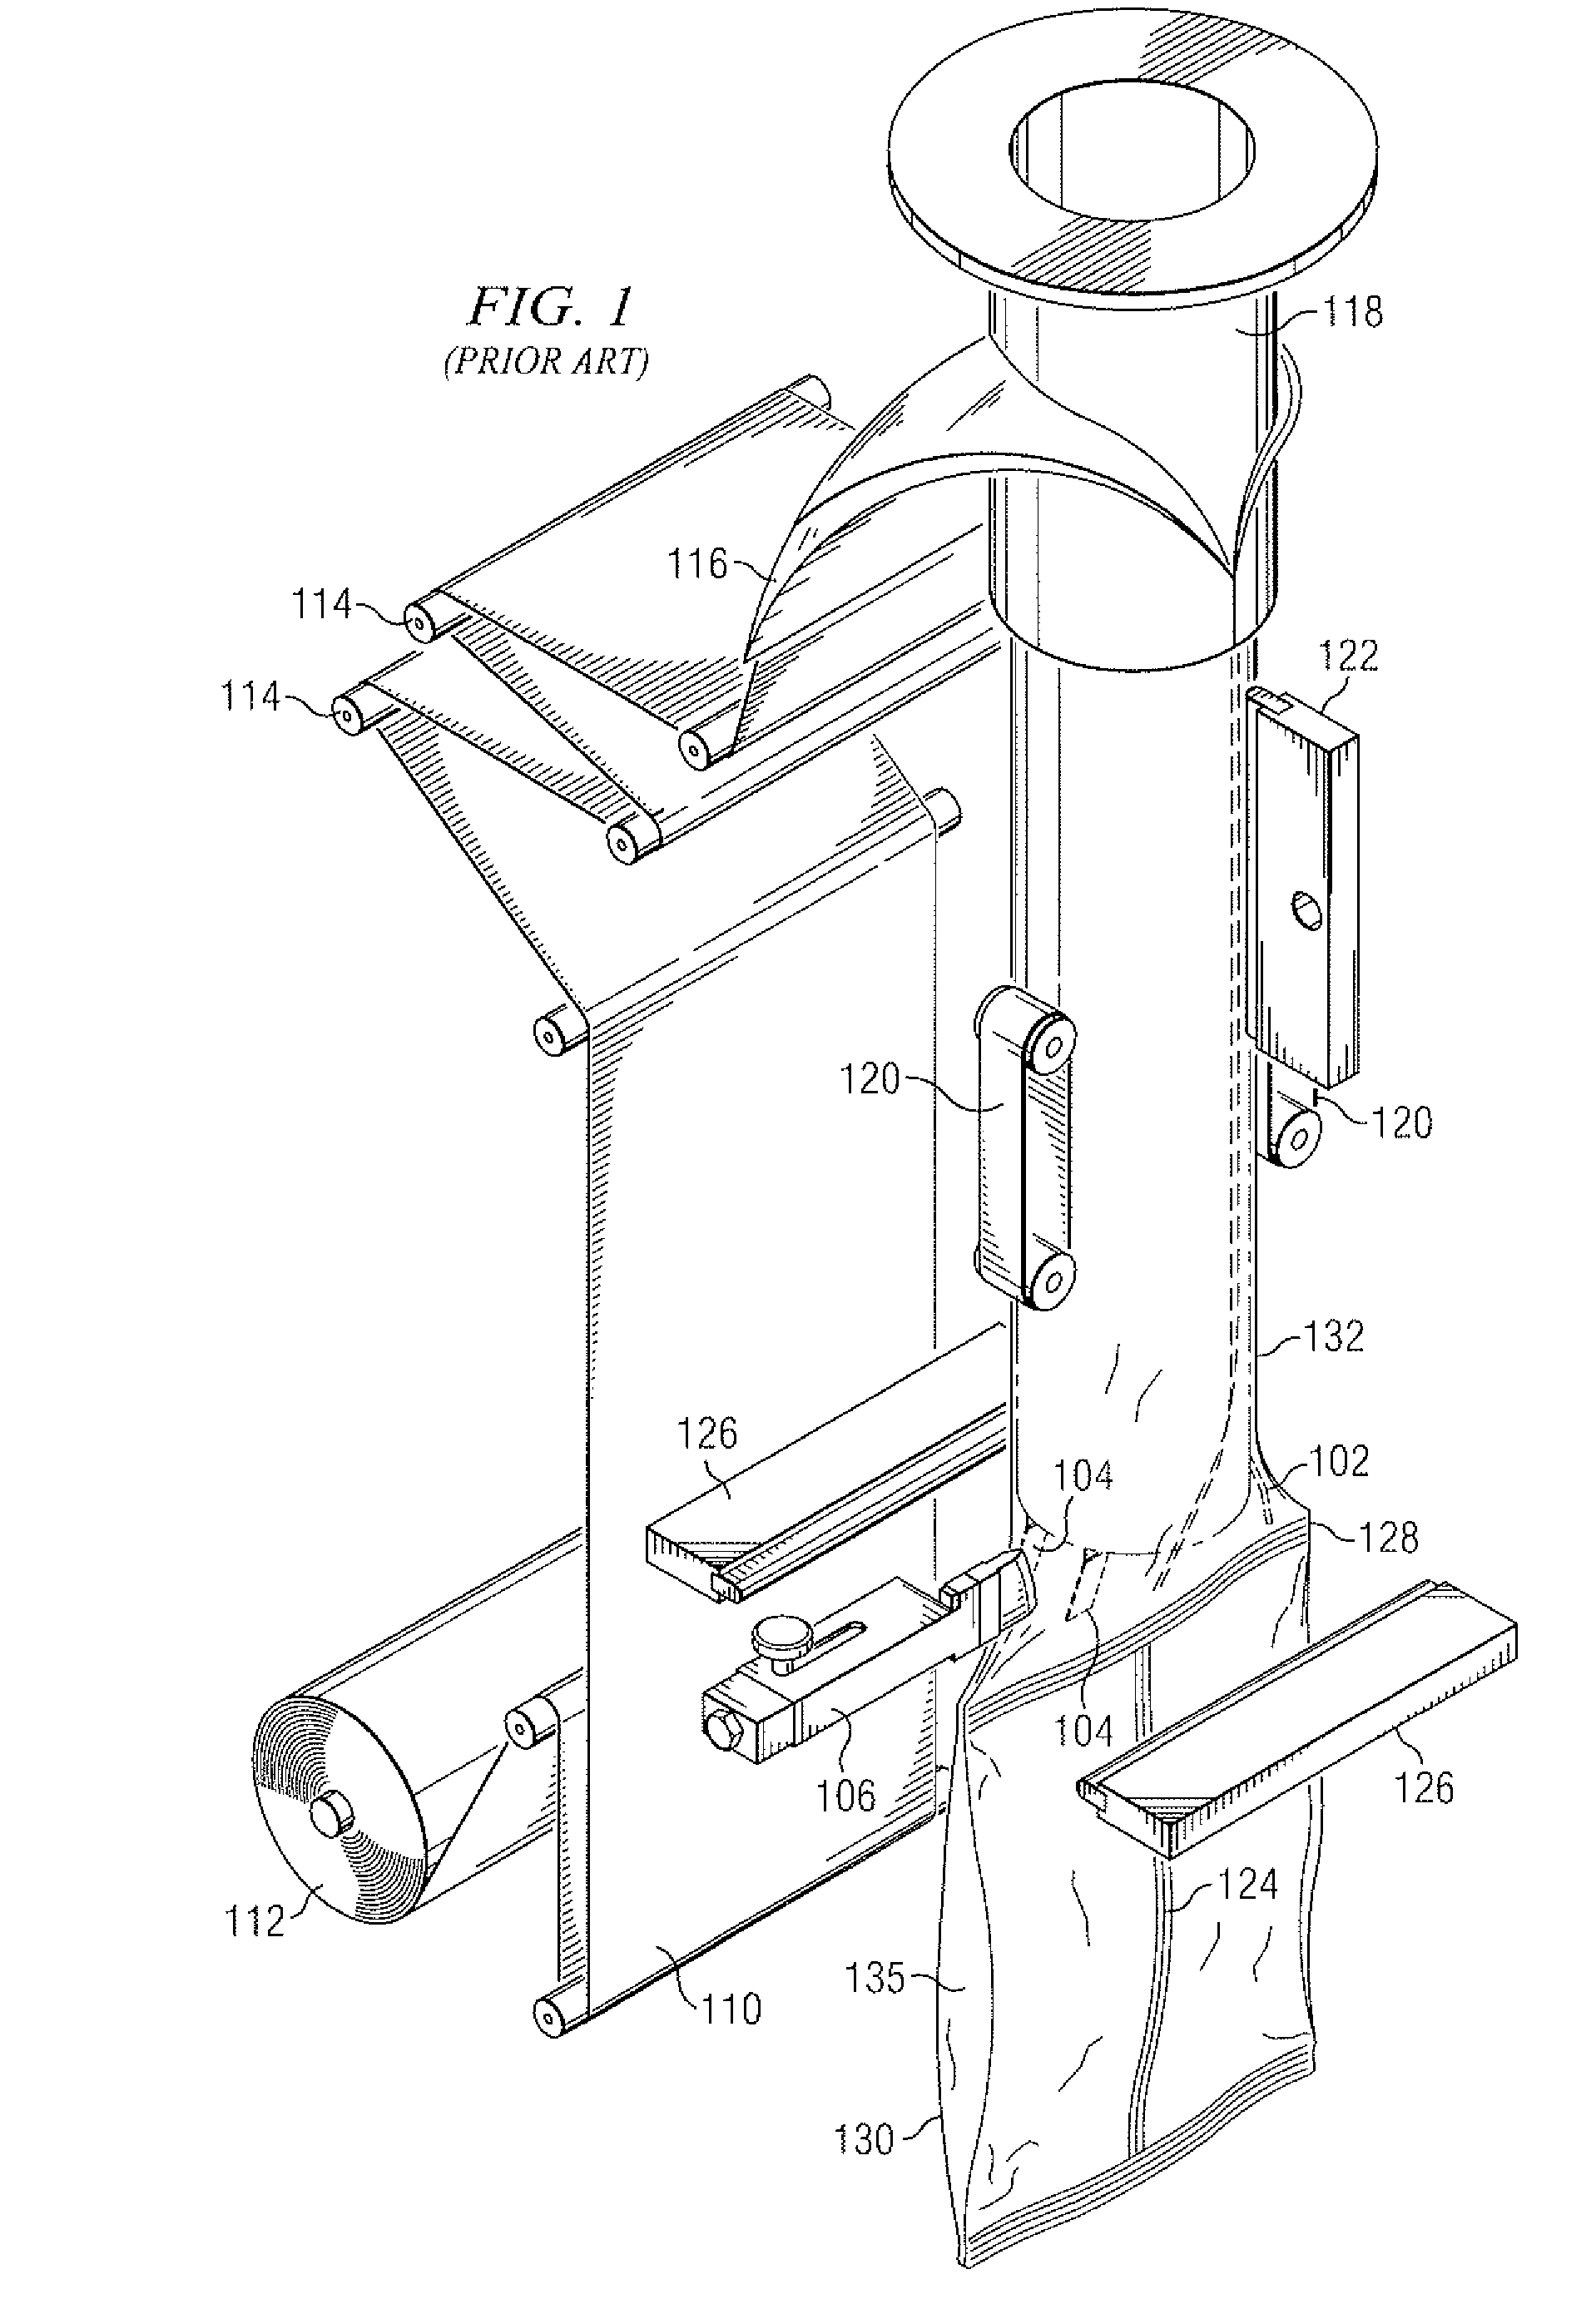 Method for Making a Multi-Compartment Microwavable Package Having a Permeable Wall Between Compartments